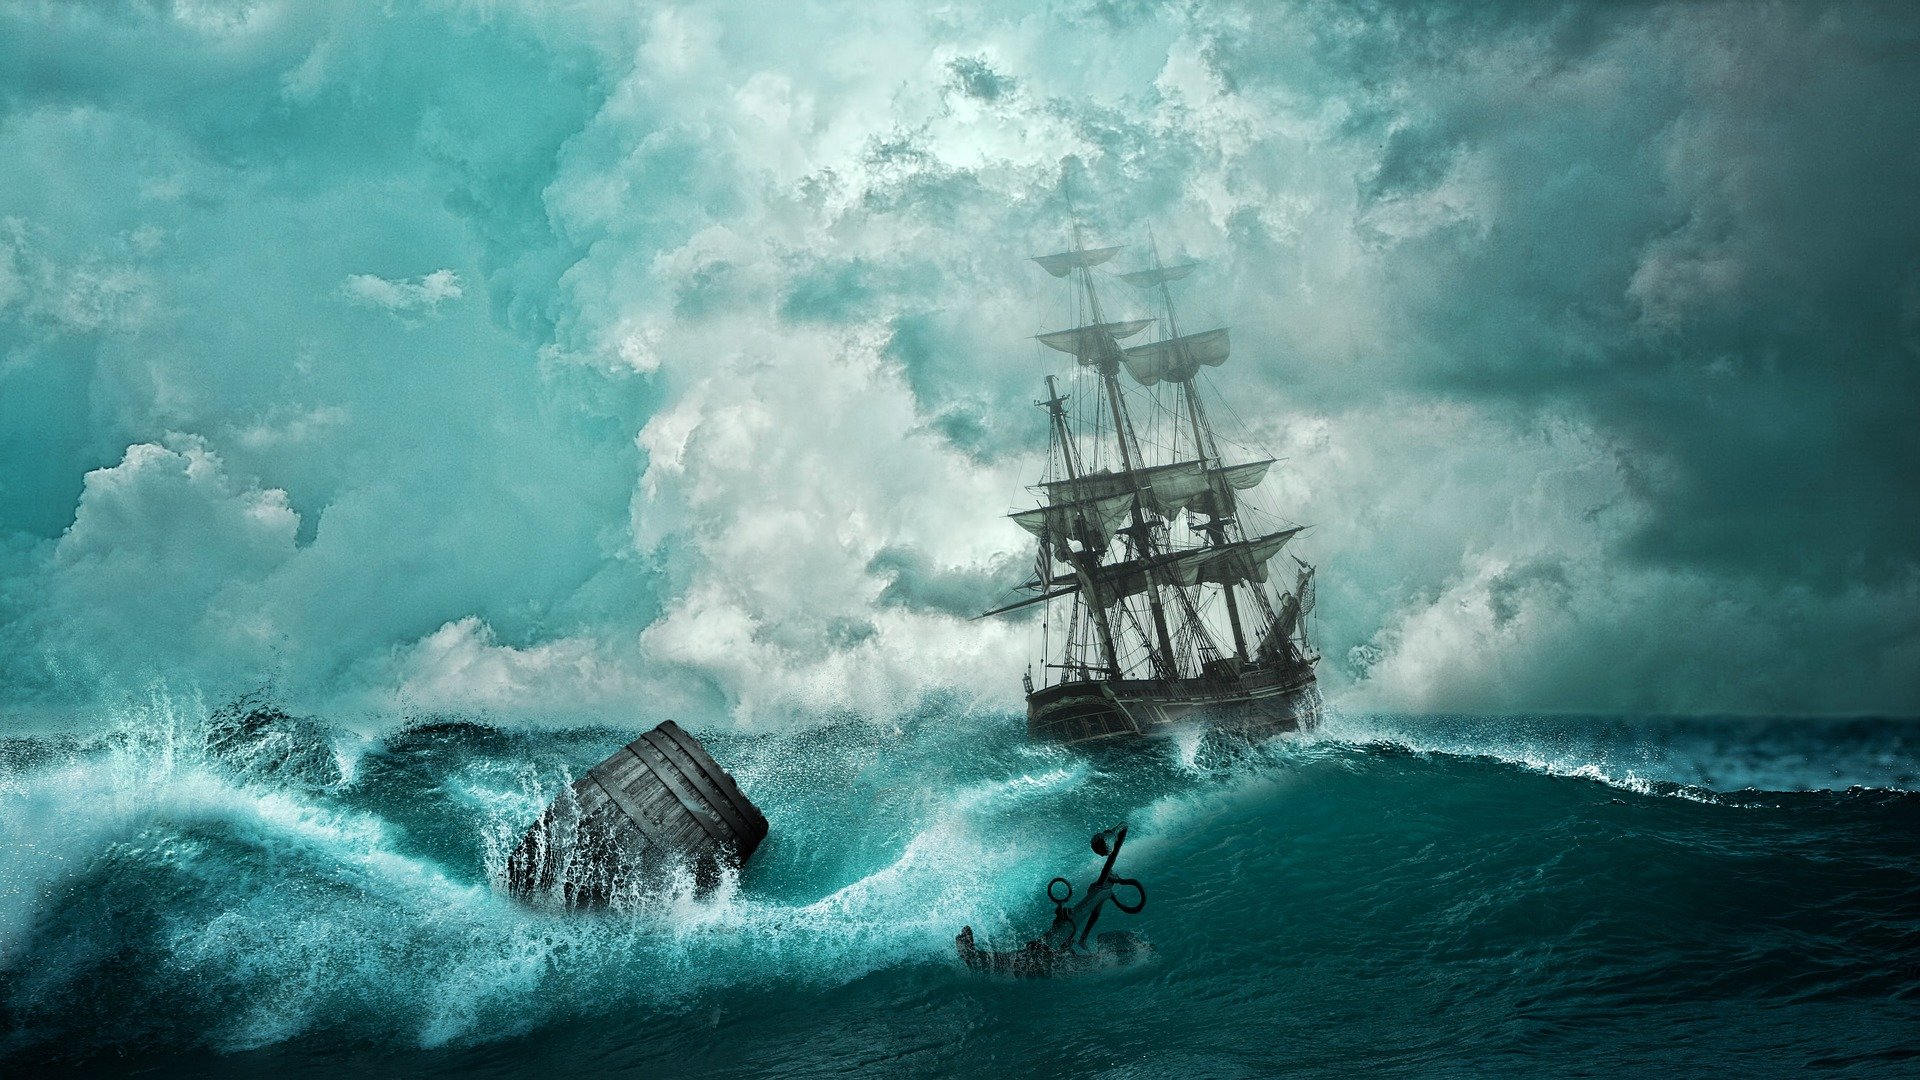 ship-wreck painting by comfreak, pixabay